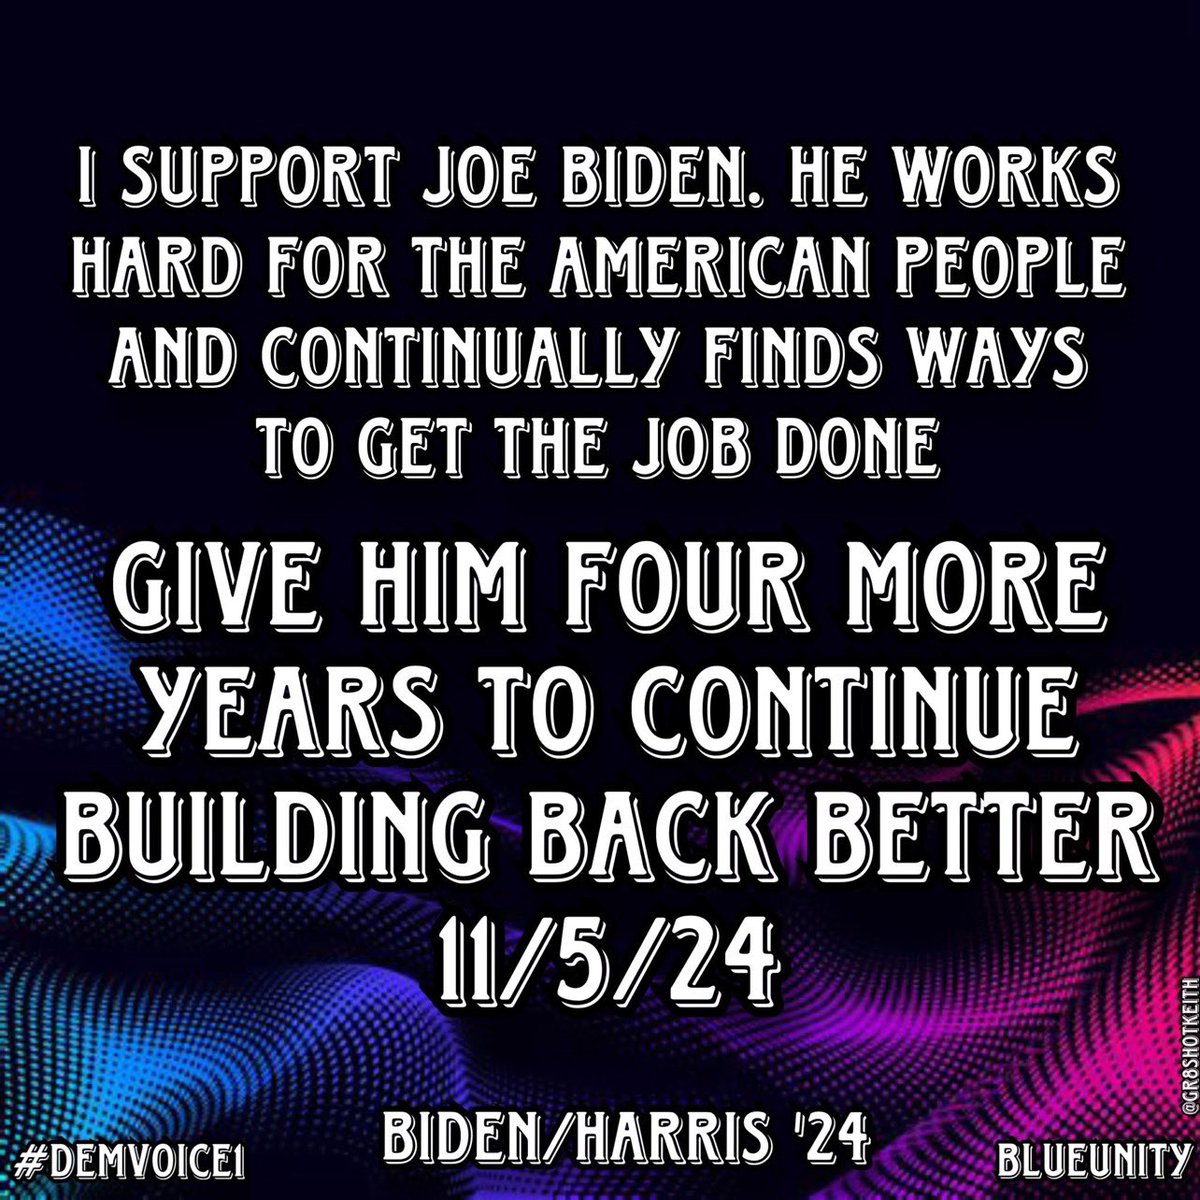 Impressive! What an achievement! President Biden has profound respect for our military. He cares deeply about every service member, past or present. Our Commander in Chief is a good and honest man. #DemsUnited #wtpBLUE #wtpGOTV24 #DemVoice1